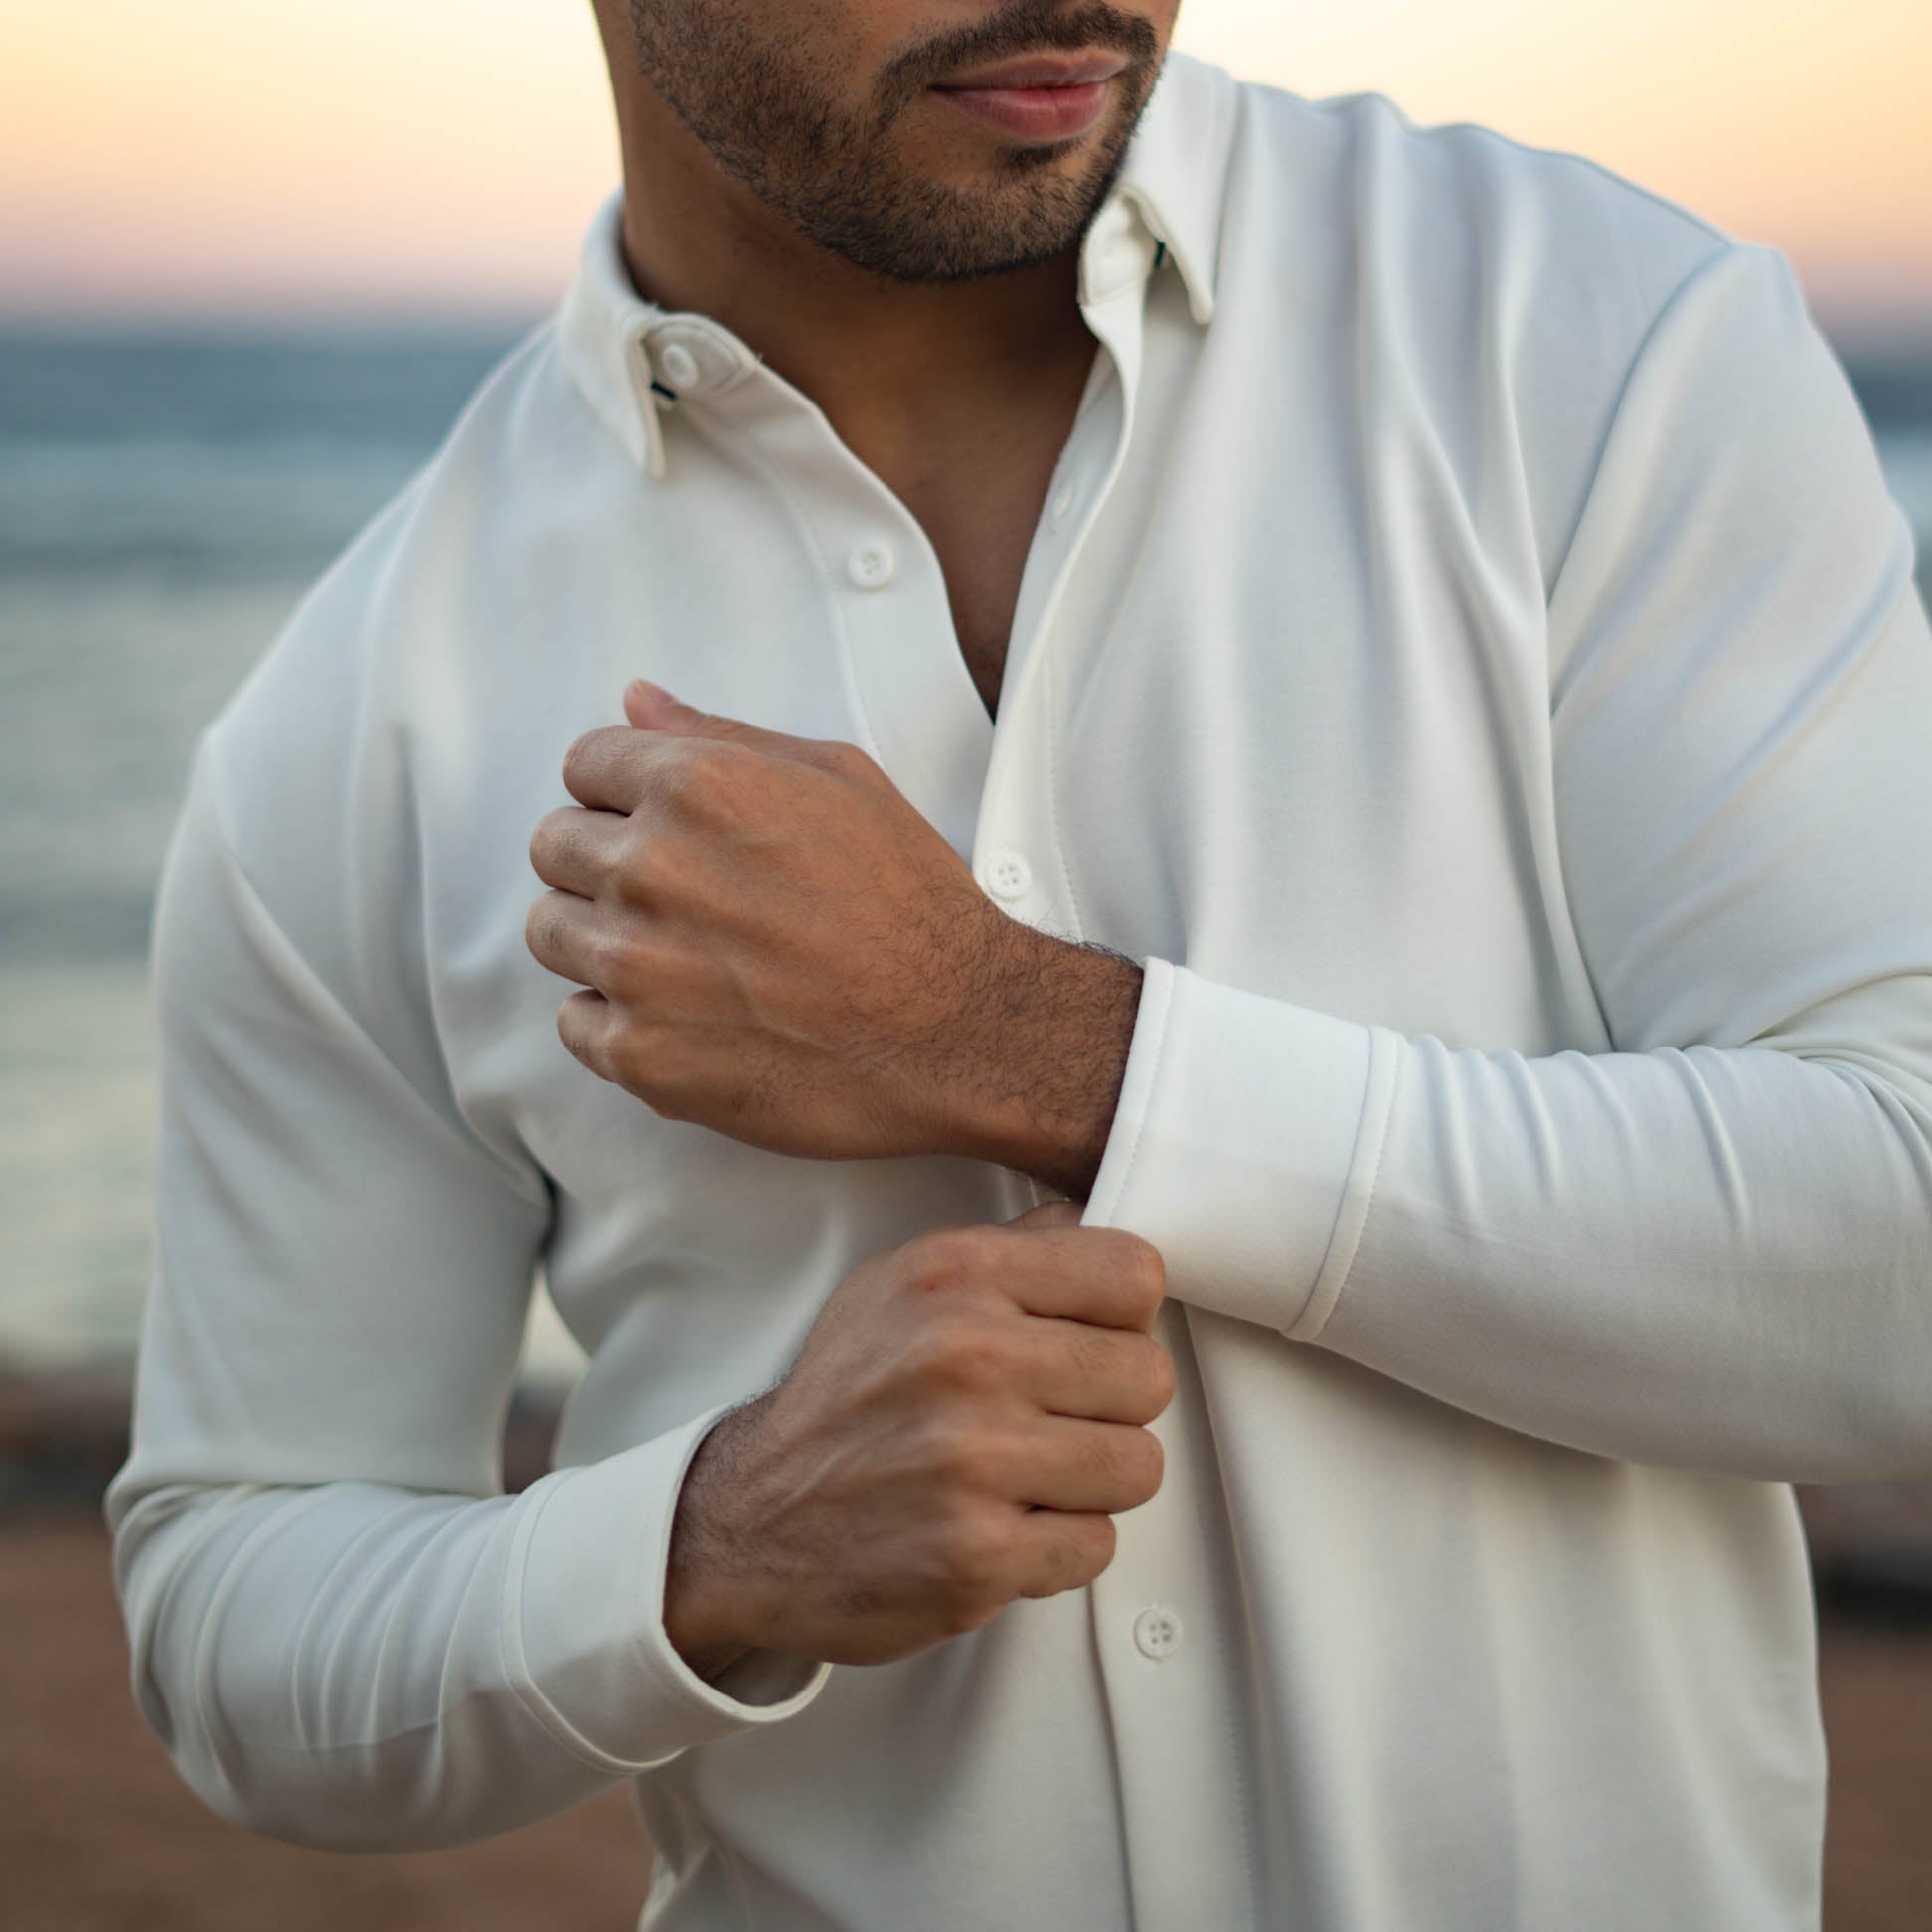 Male model wearing a white flex button down shirt for short men from under510.com